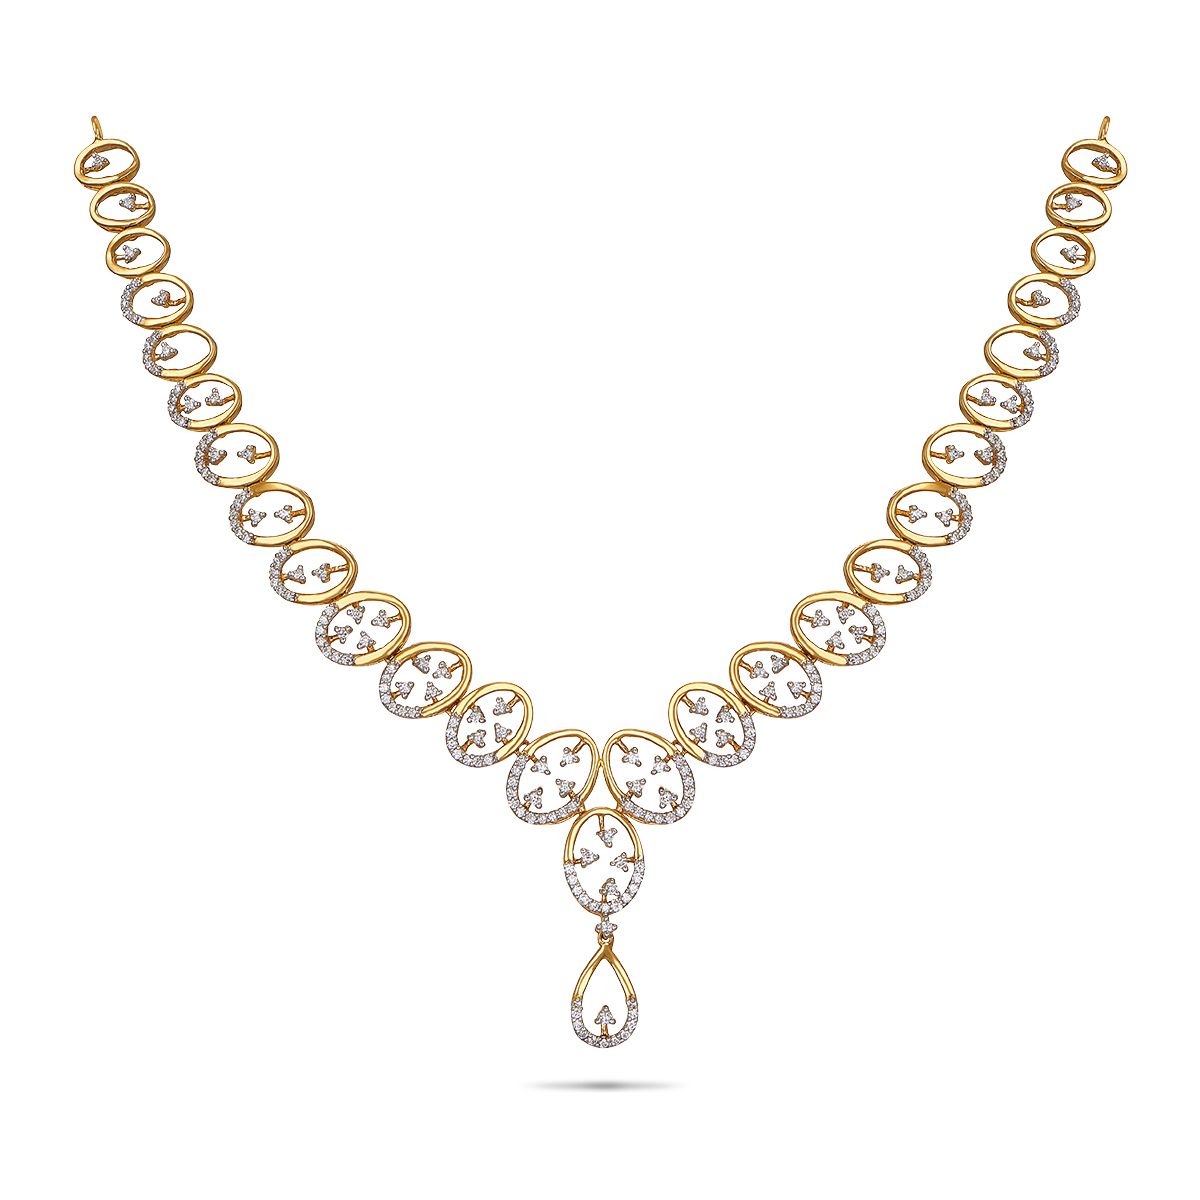 Buy Stunning Yellow Gold and Diamond Necklace Set Online